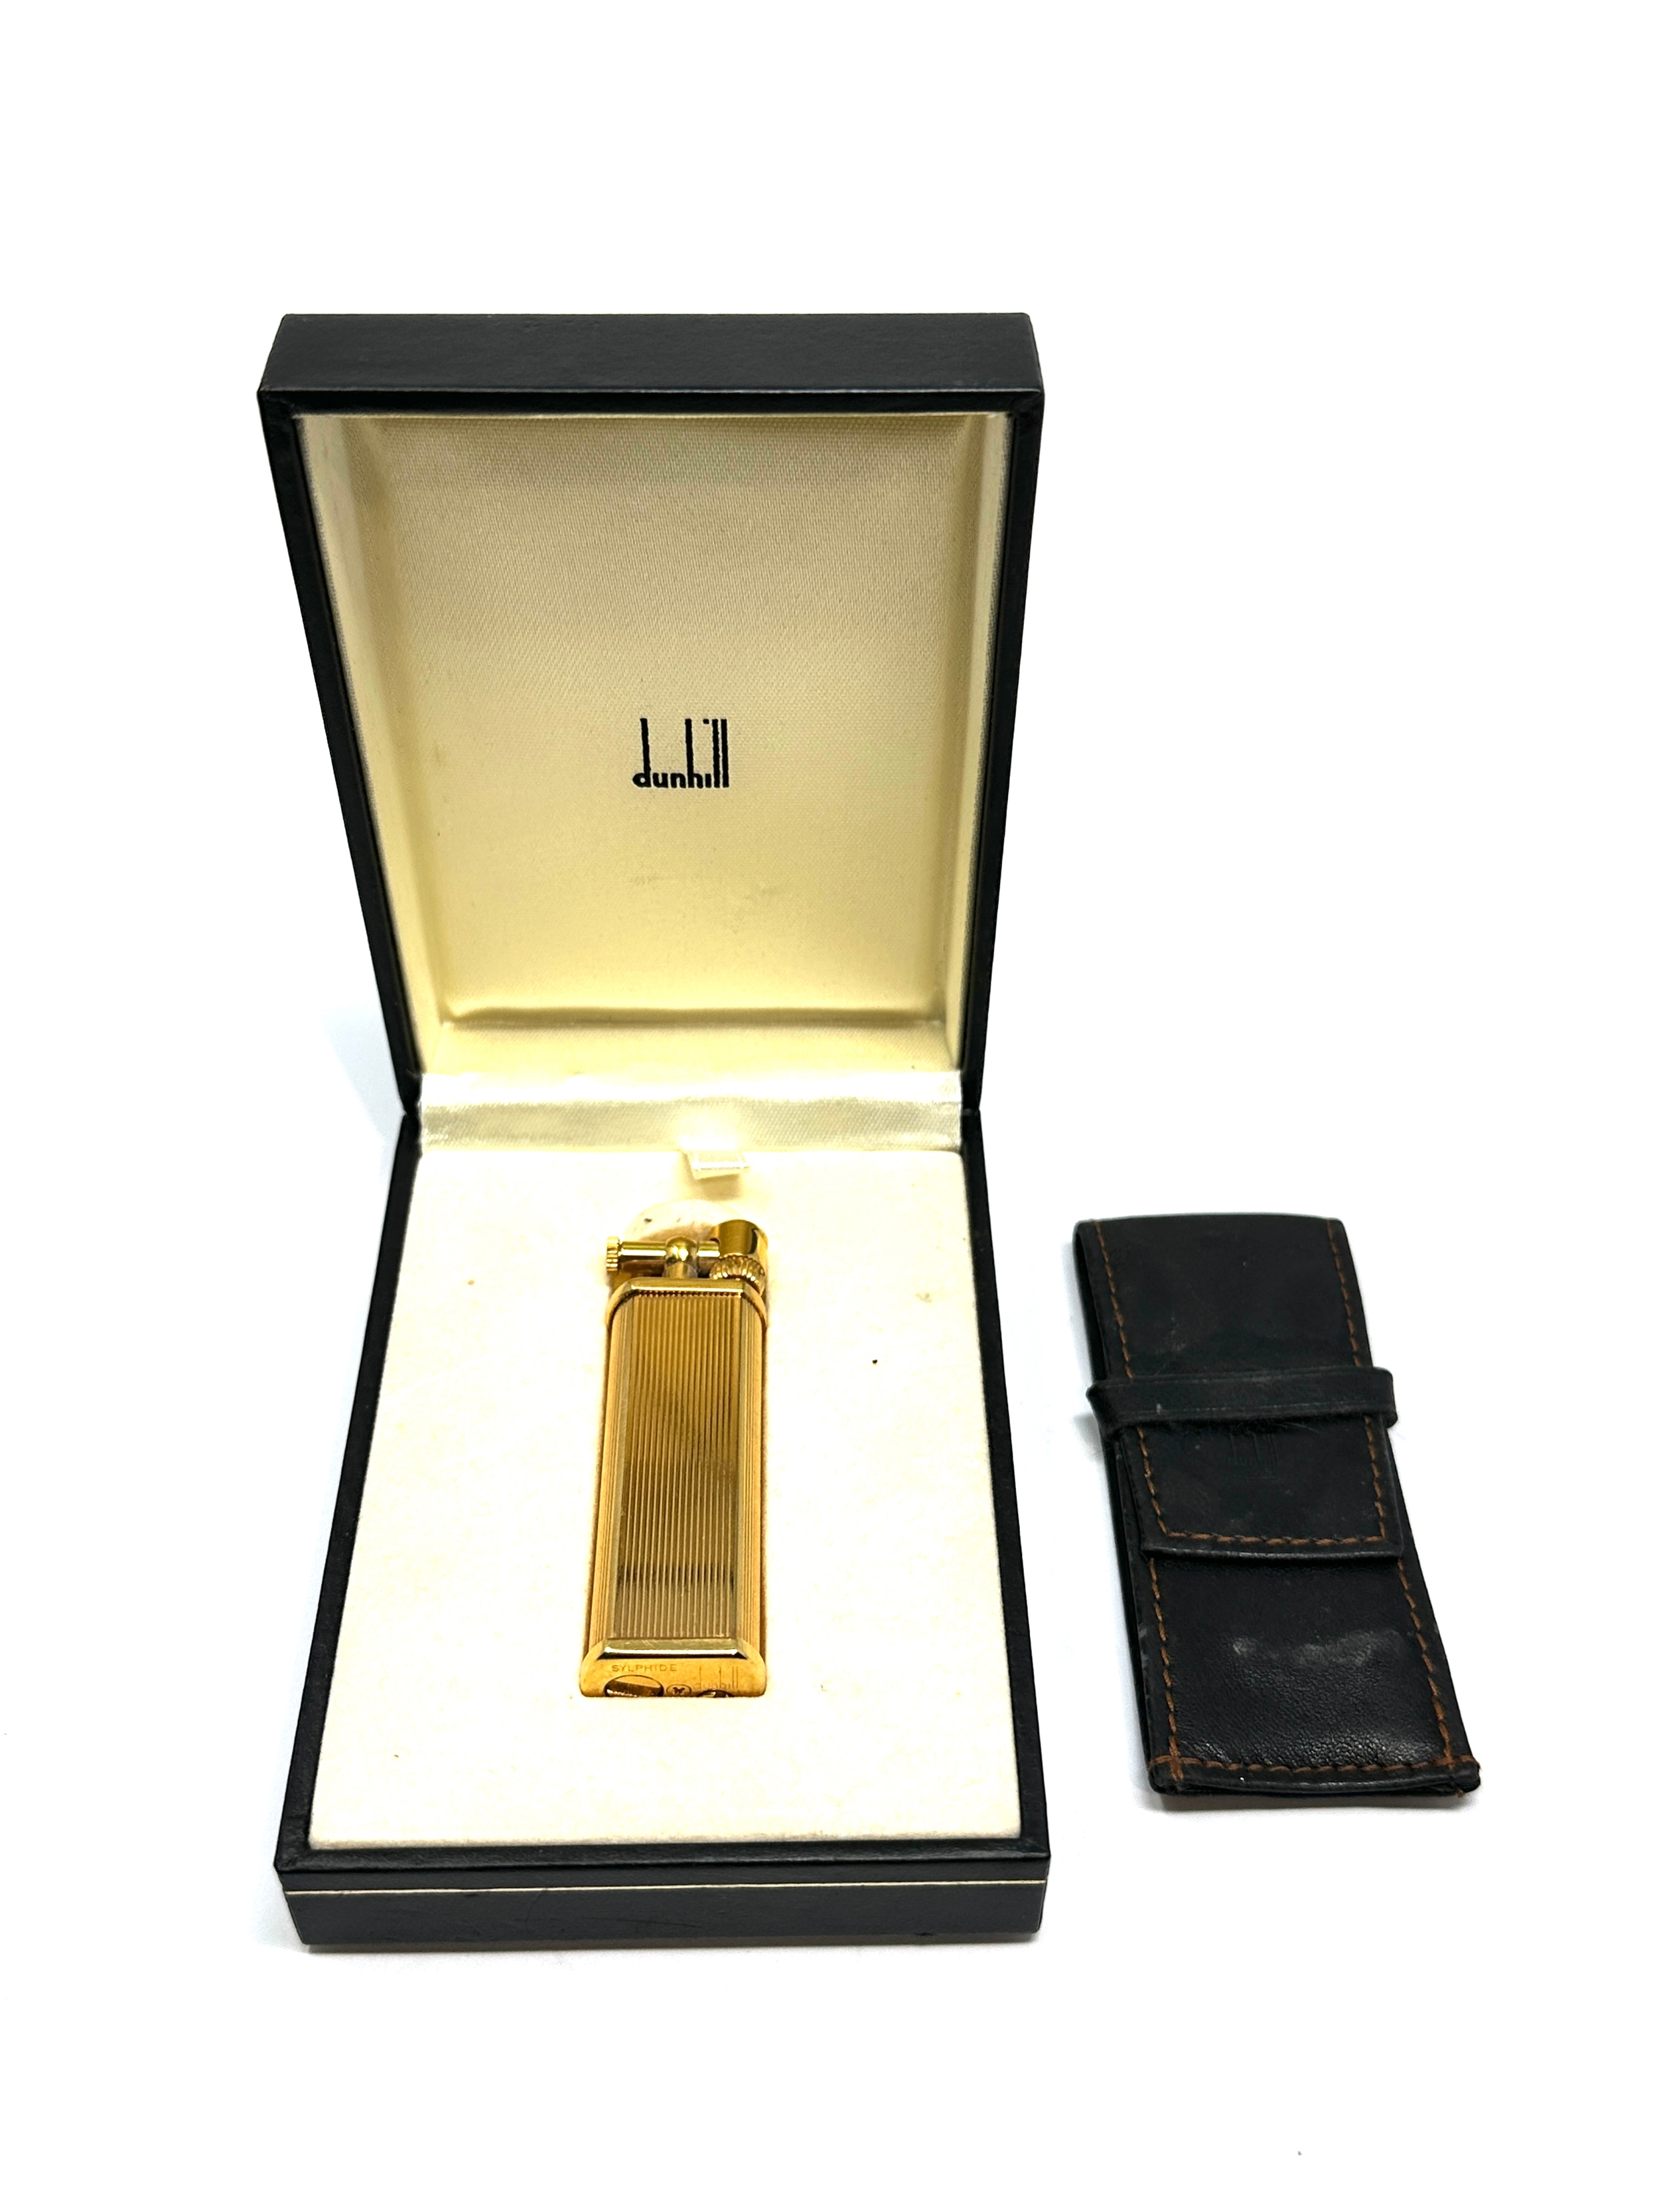 Vintage Boxed flip top dunhill sylphide cigarette lighter looks in very good condition with